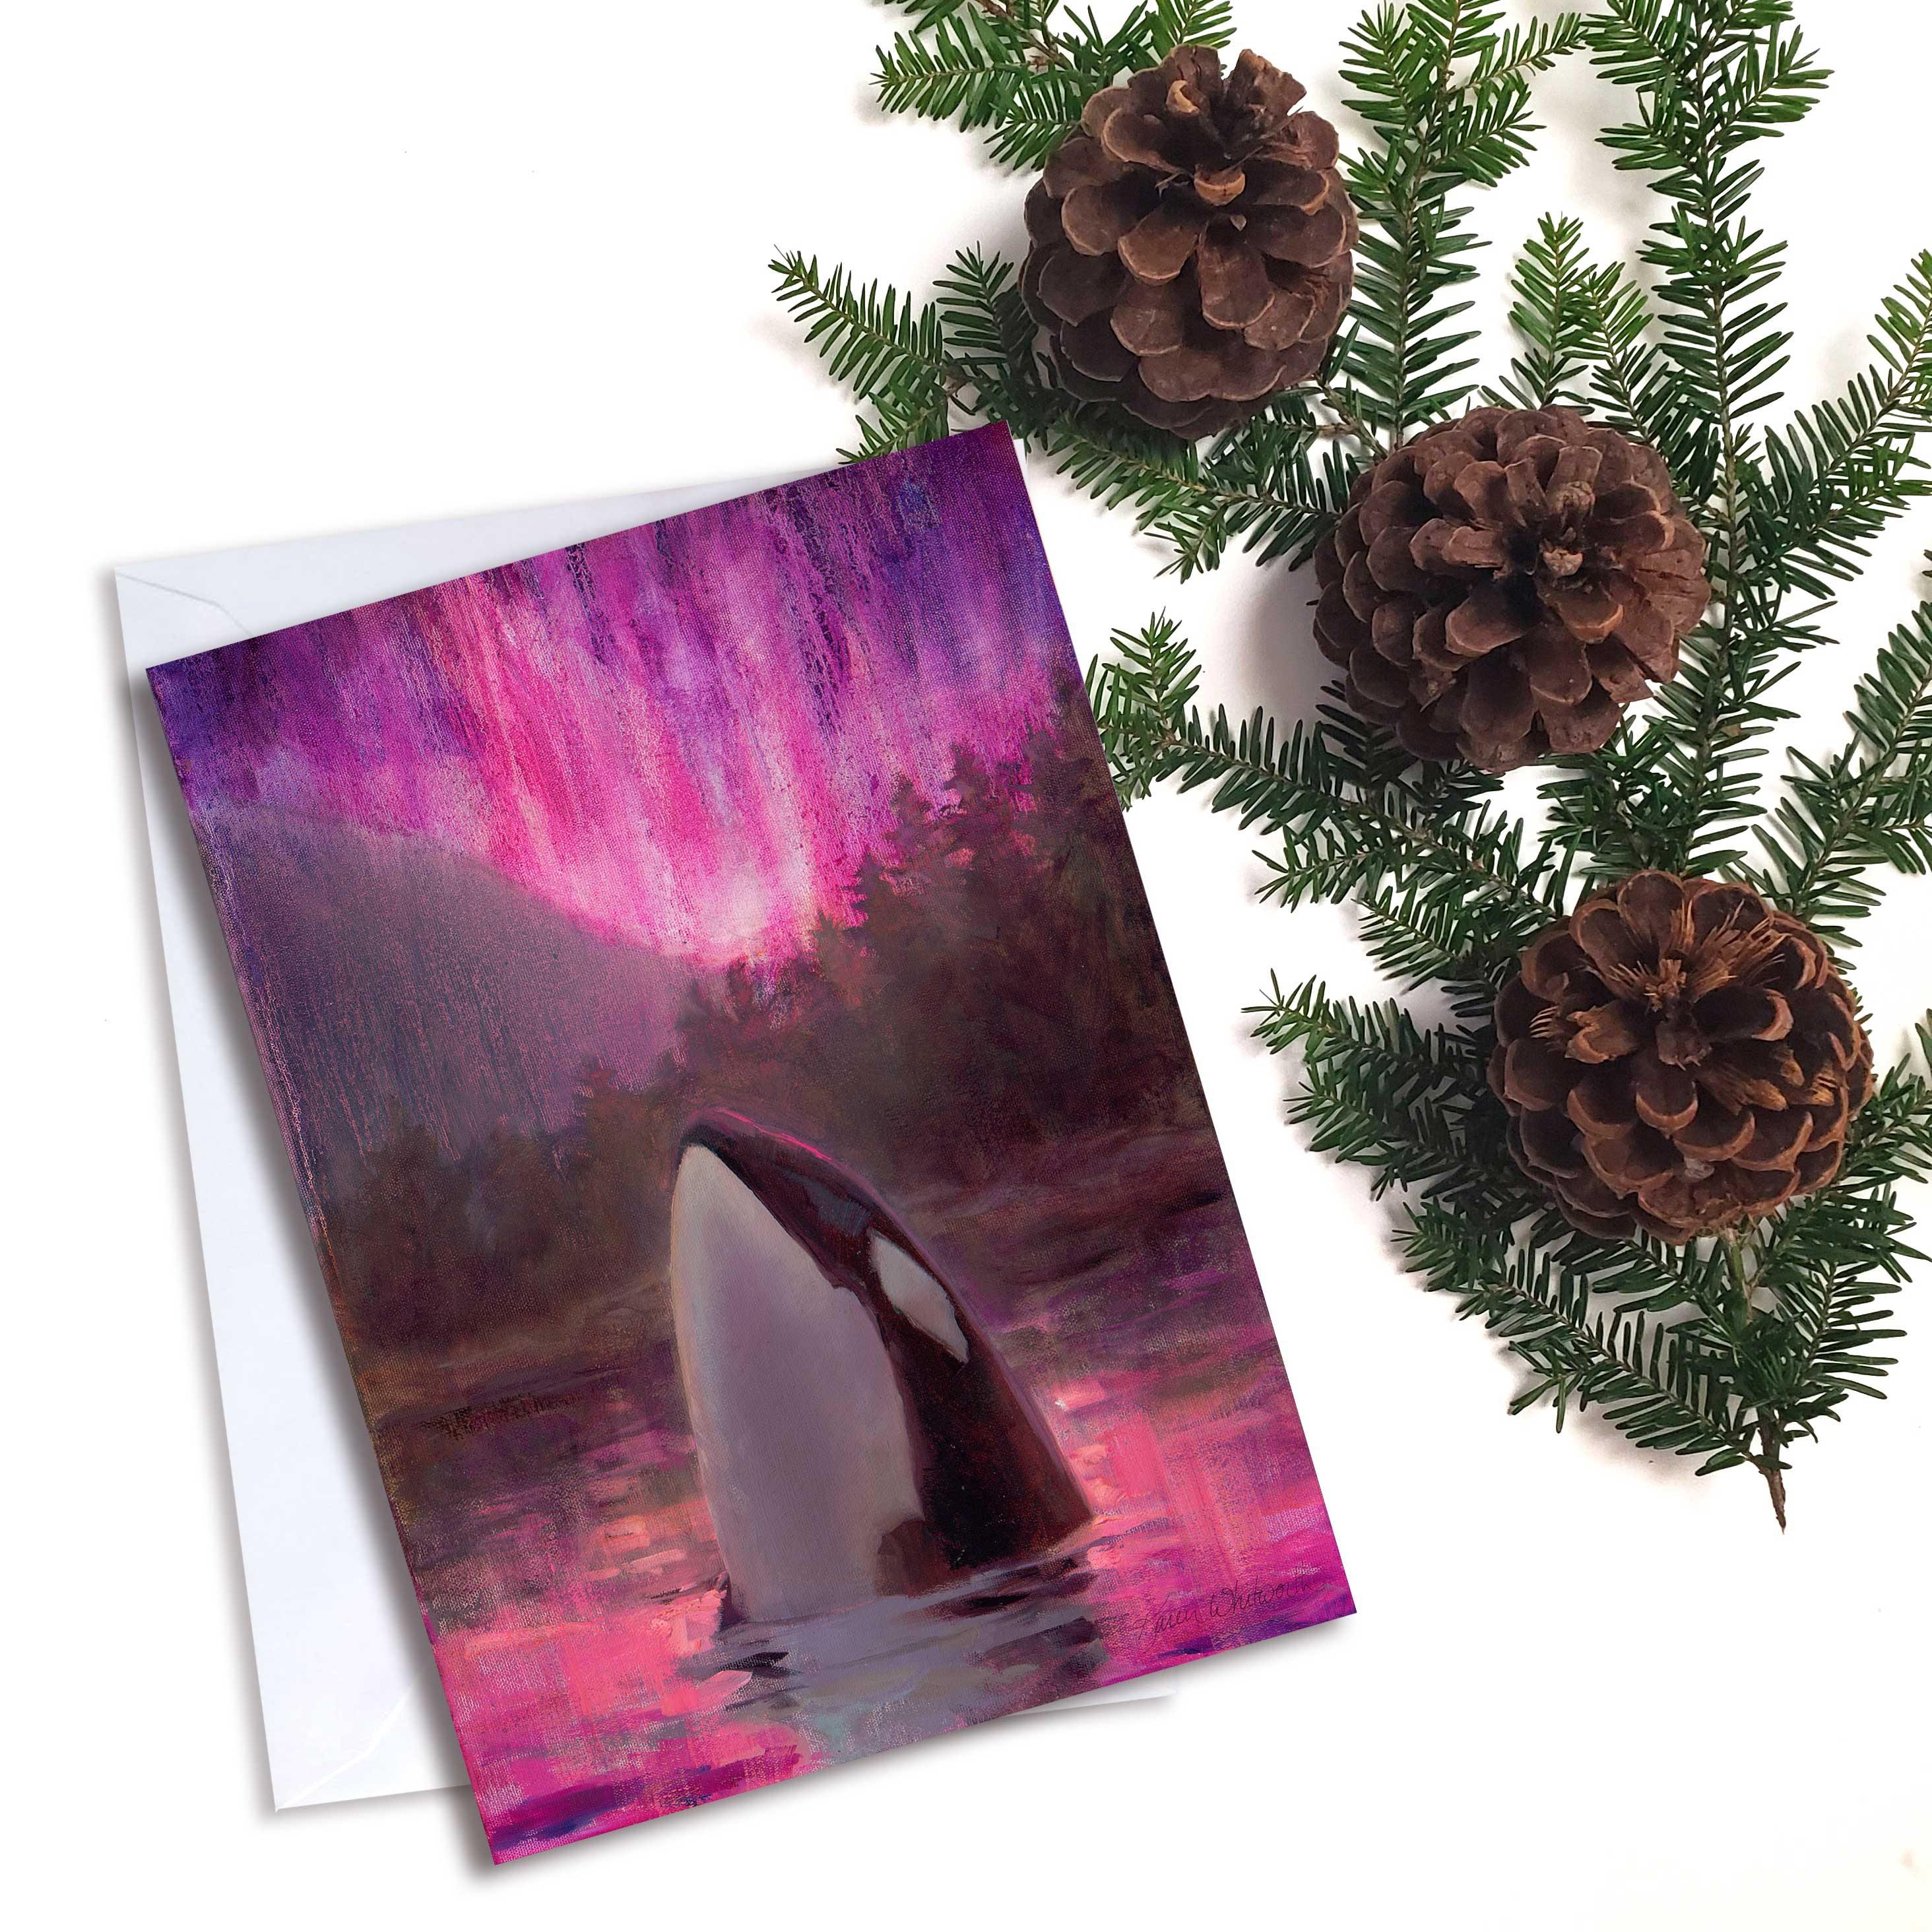 Orca Killer Whale greeting card with pink Northern Lights by Alaska artist Karen Whitworth